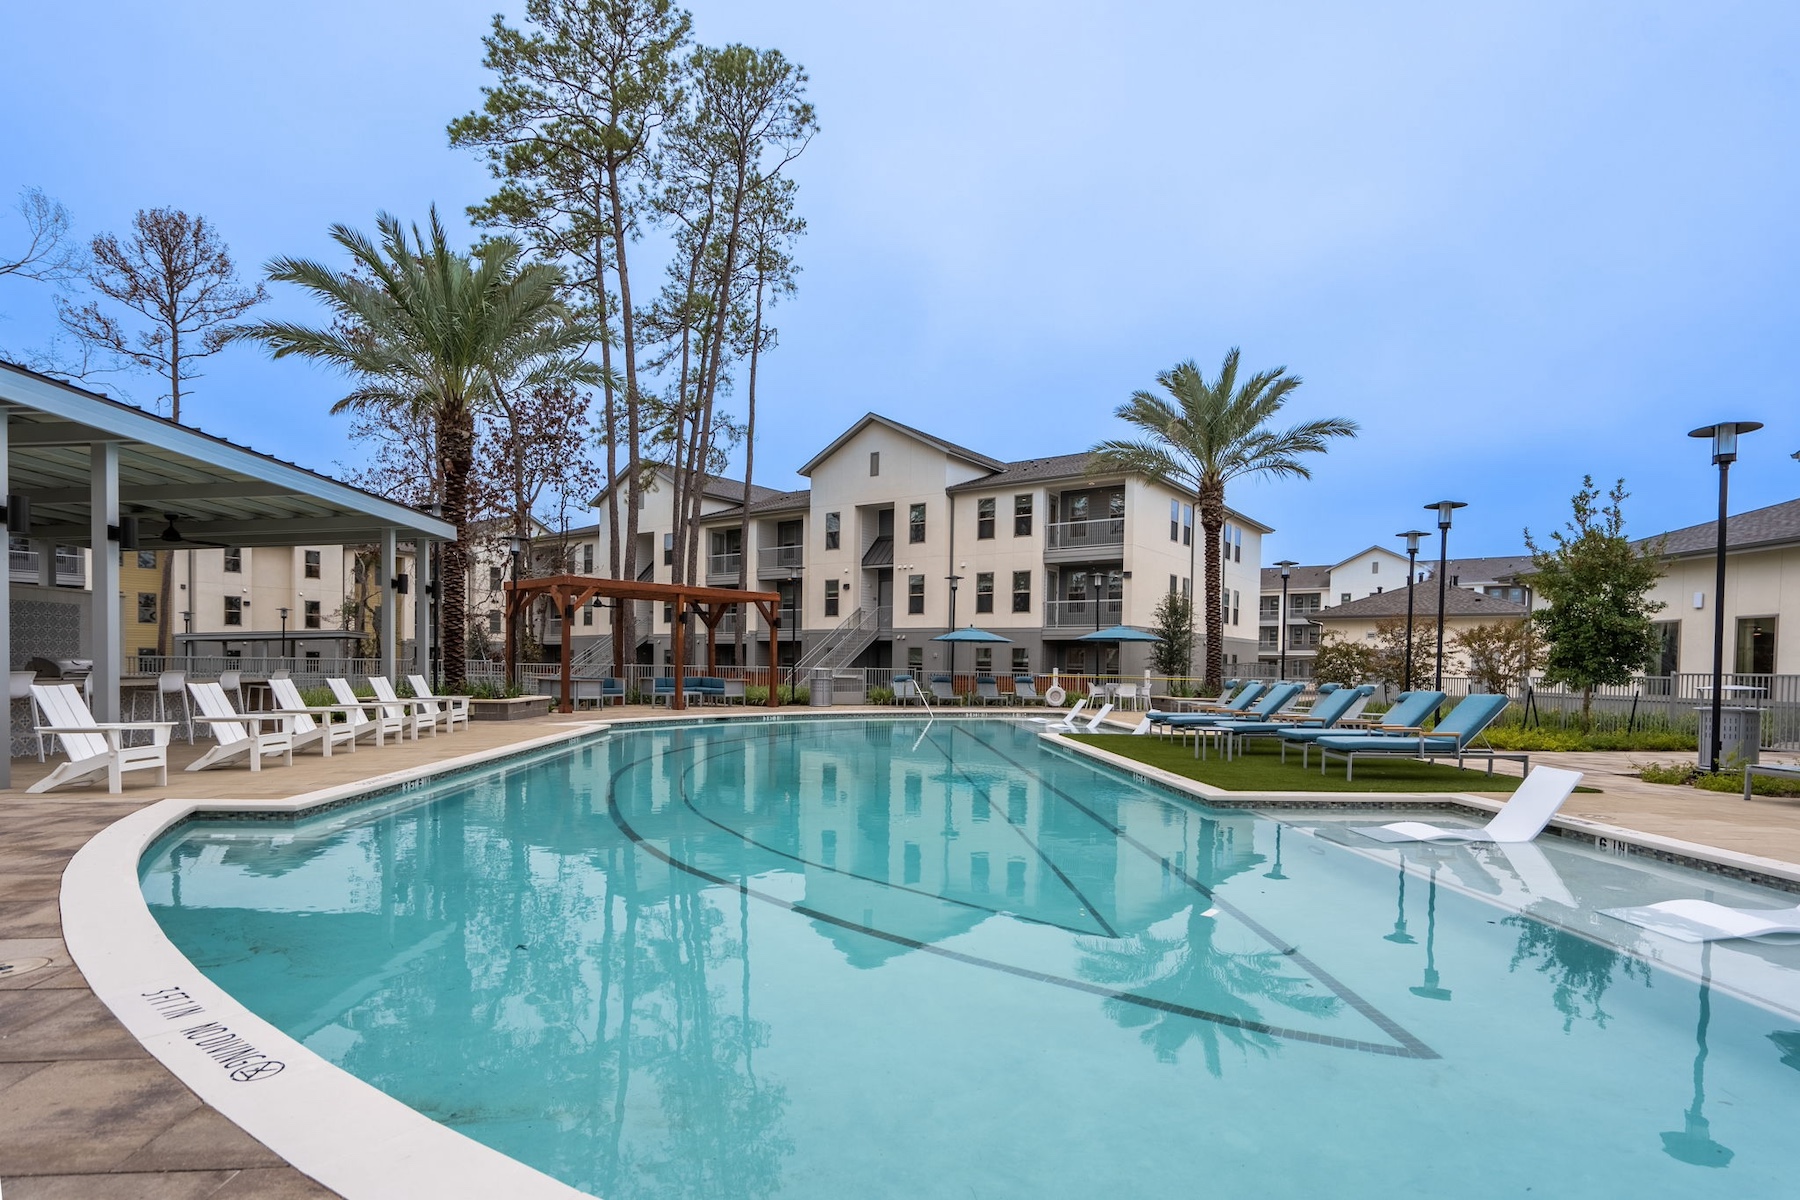 pool and exterior Amenities